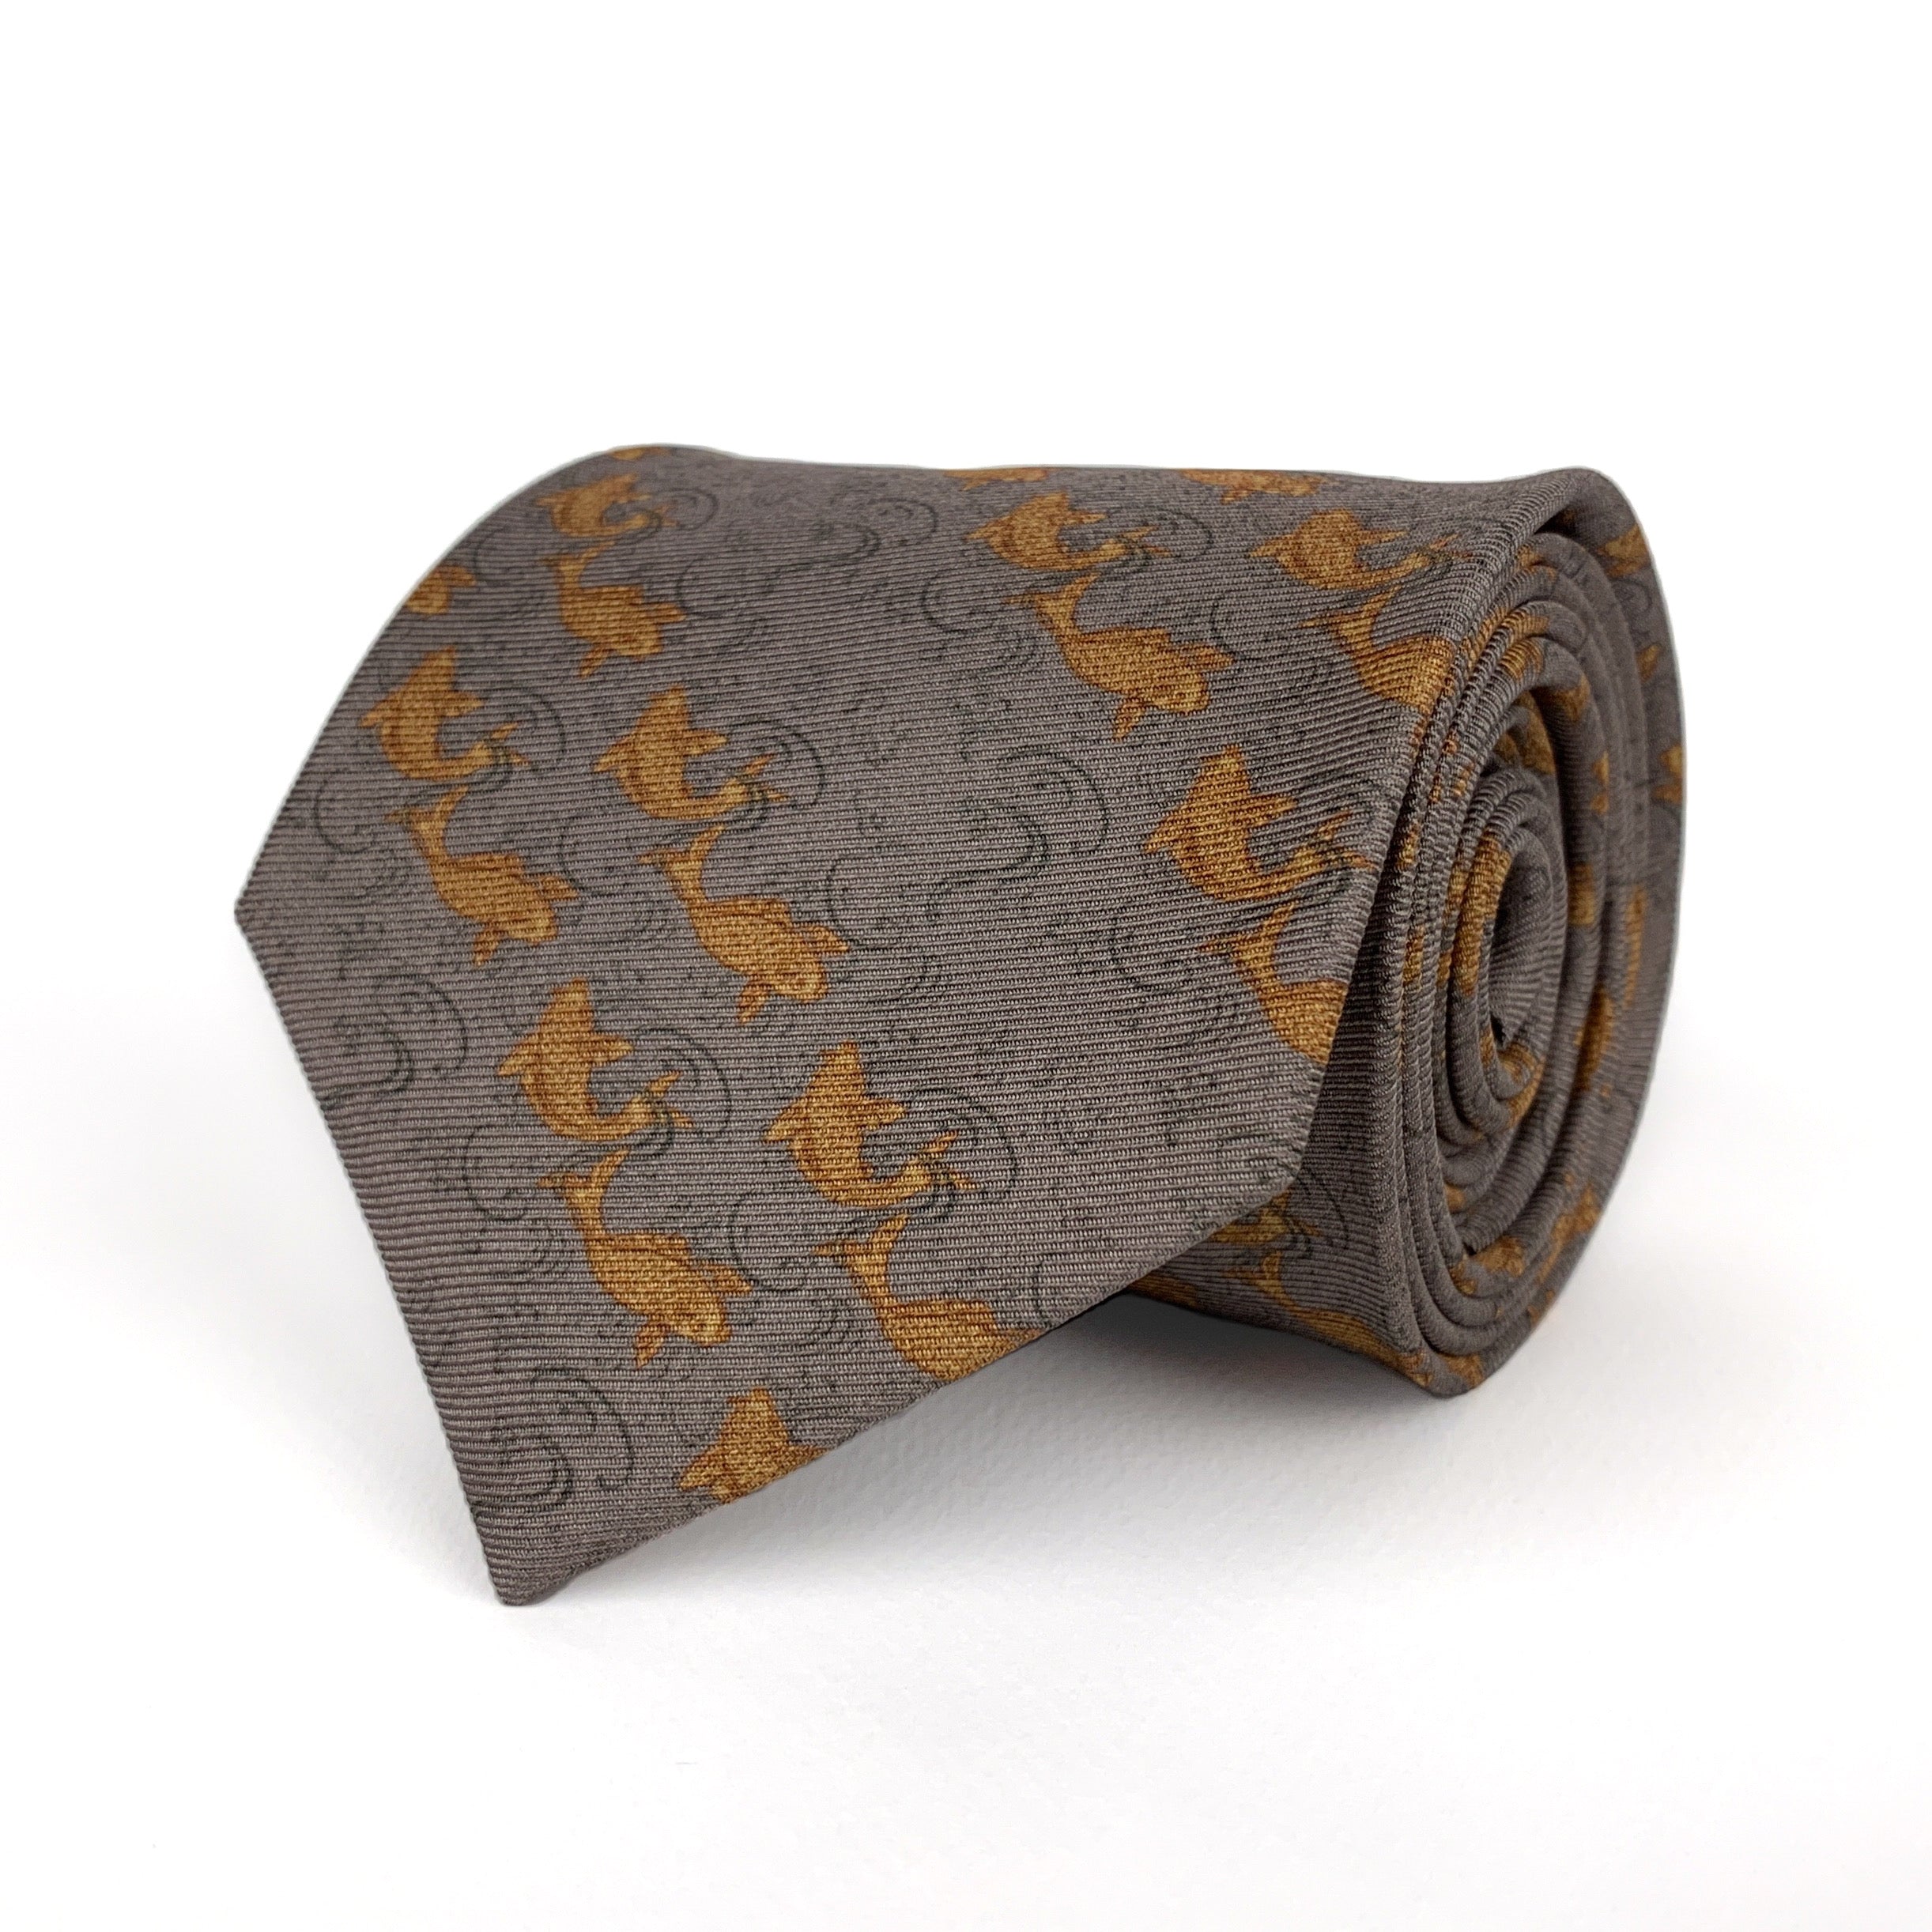 Mulberry silk twill tie in a grey color with a printed pattern of orange fish placed in diagonal stripes rolled and placed on a white background